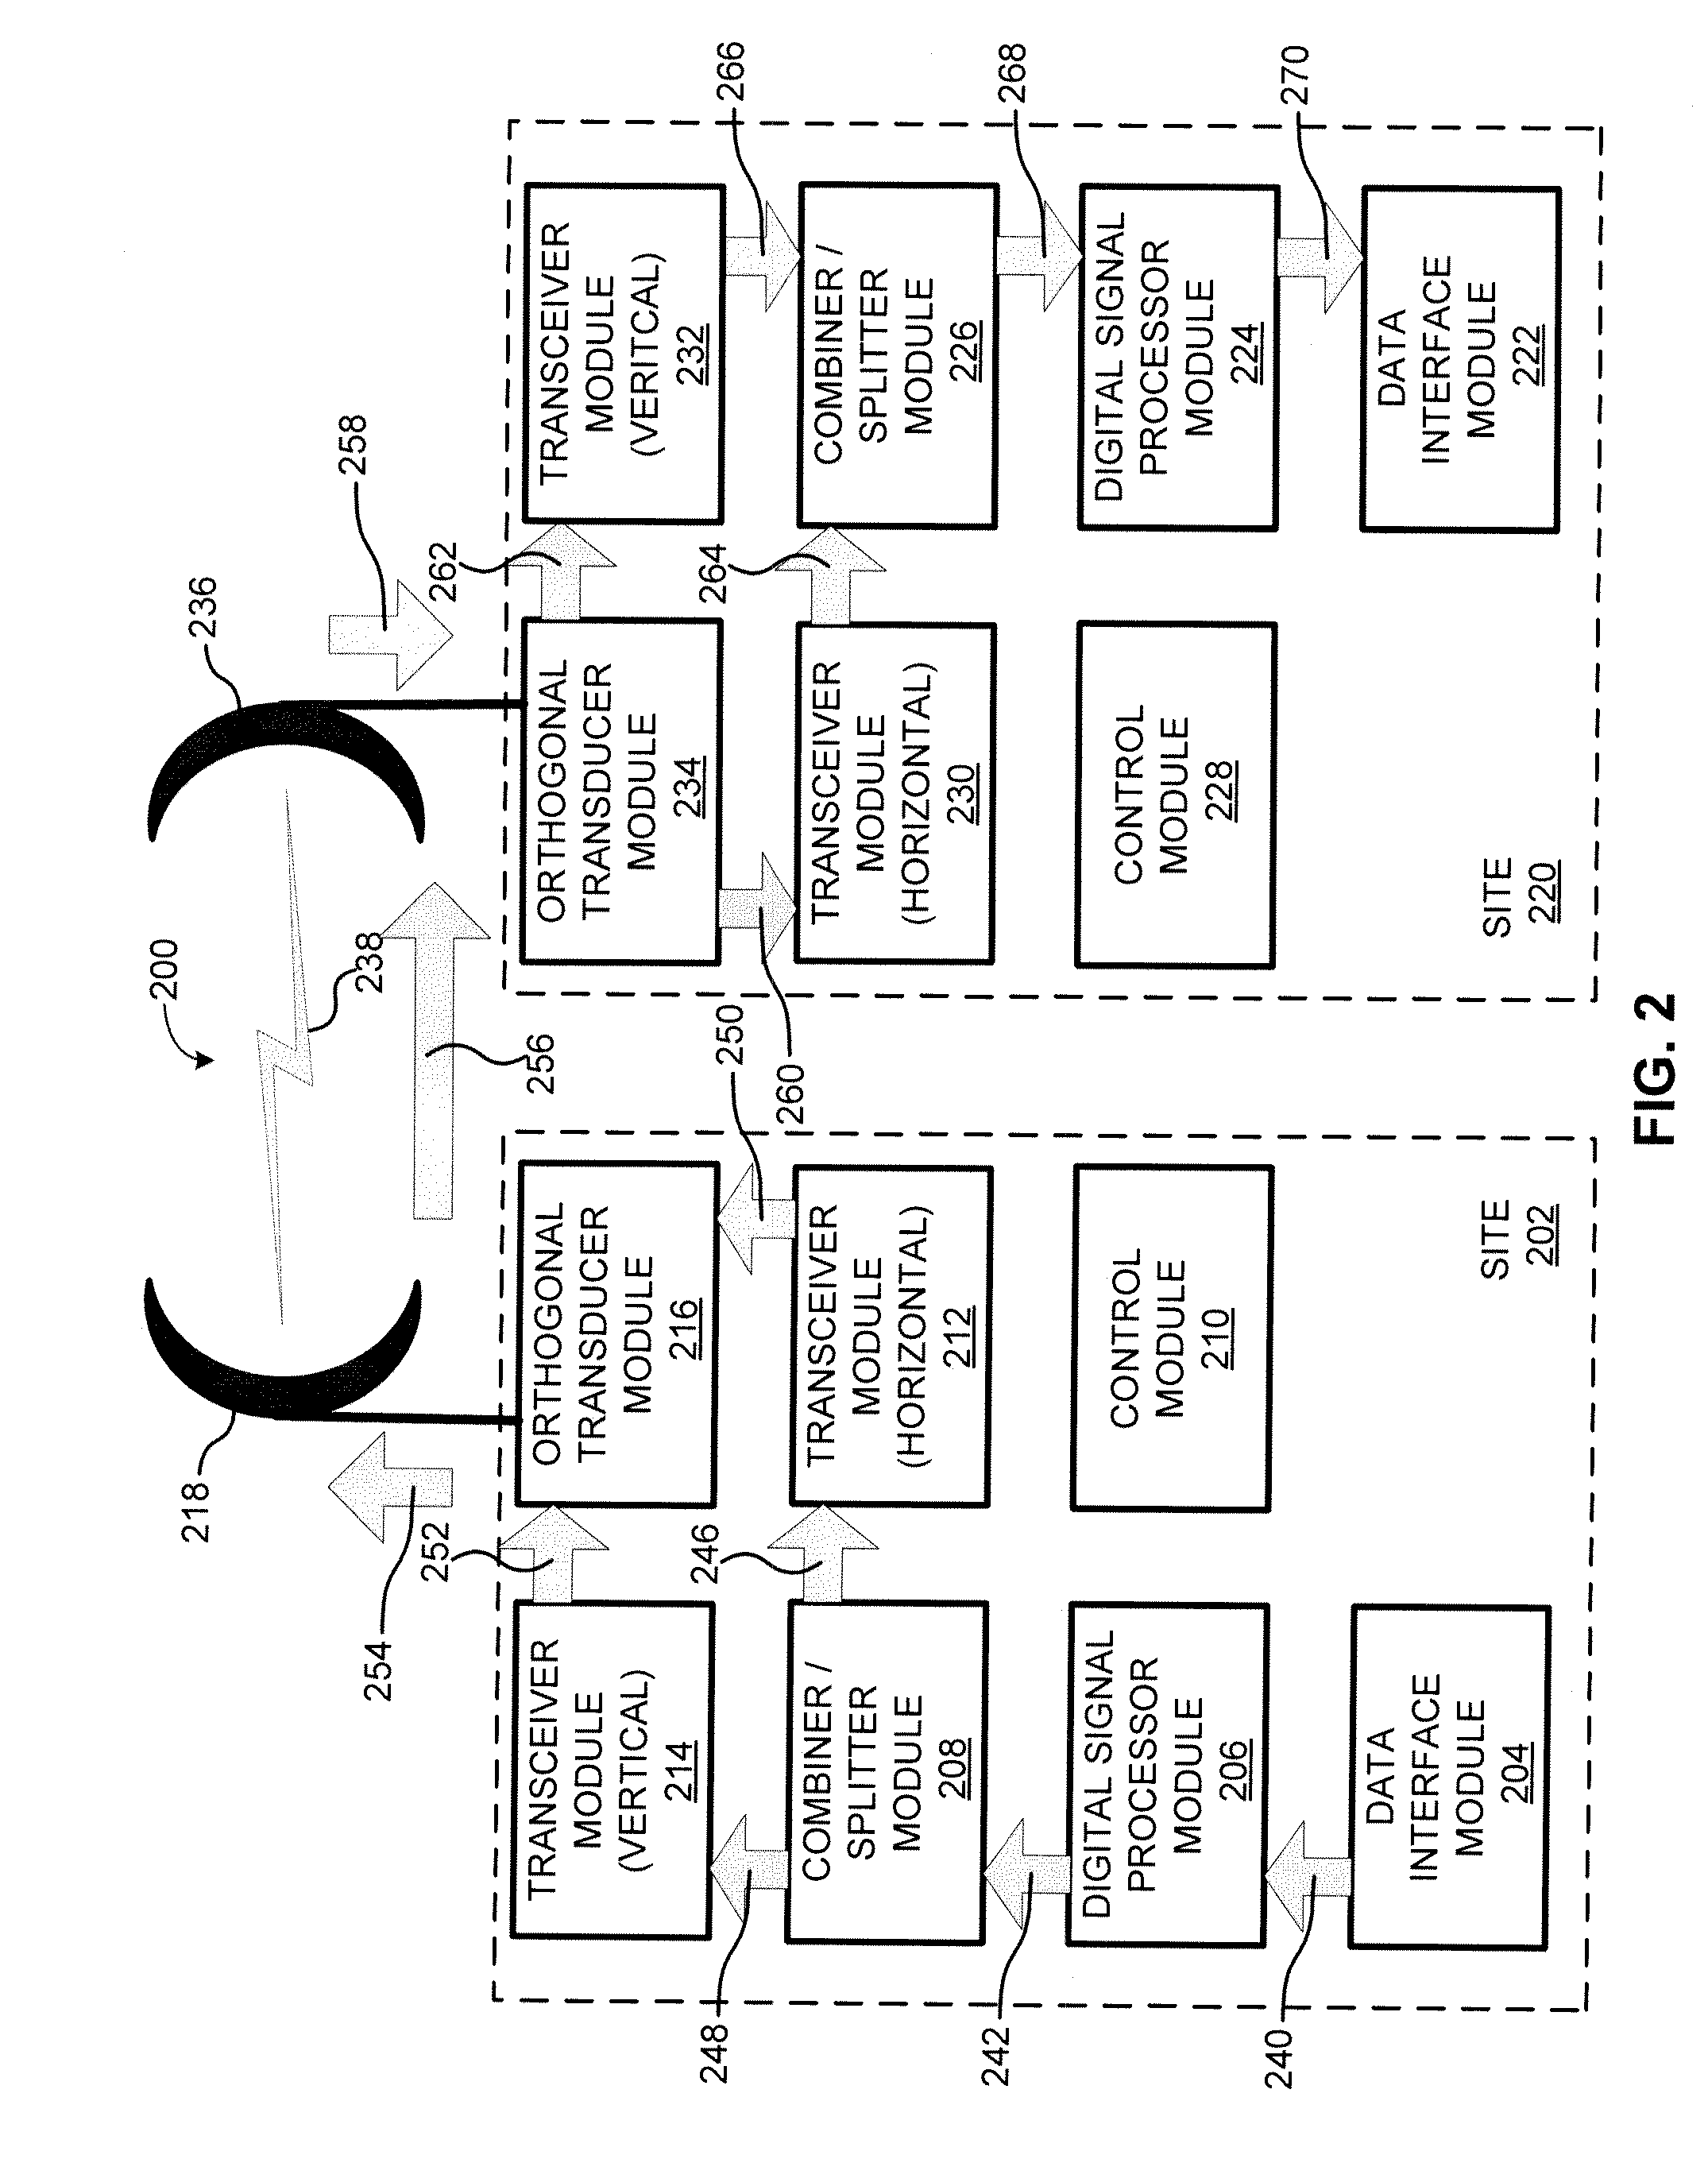 Systems and Methods for Wireless Communication Using Polarization Diversity